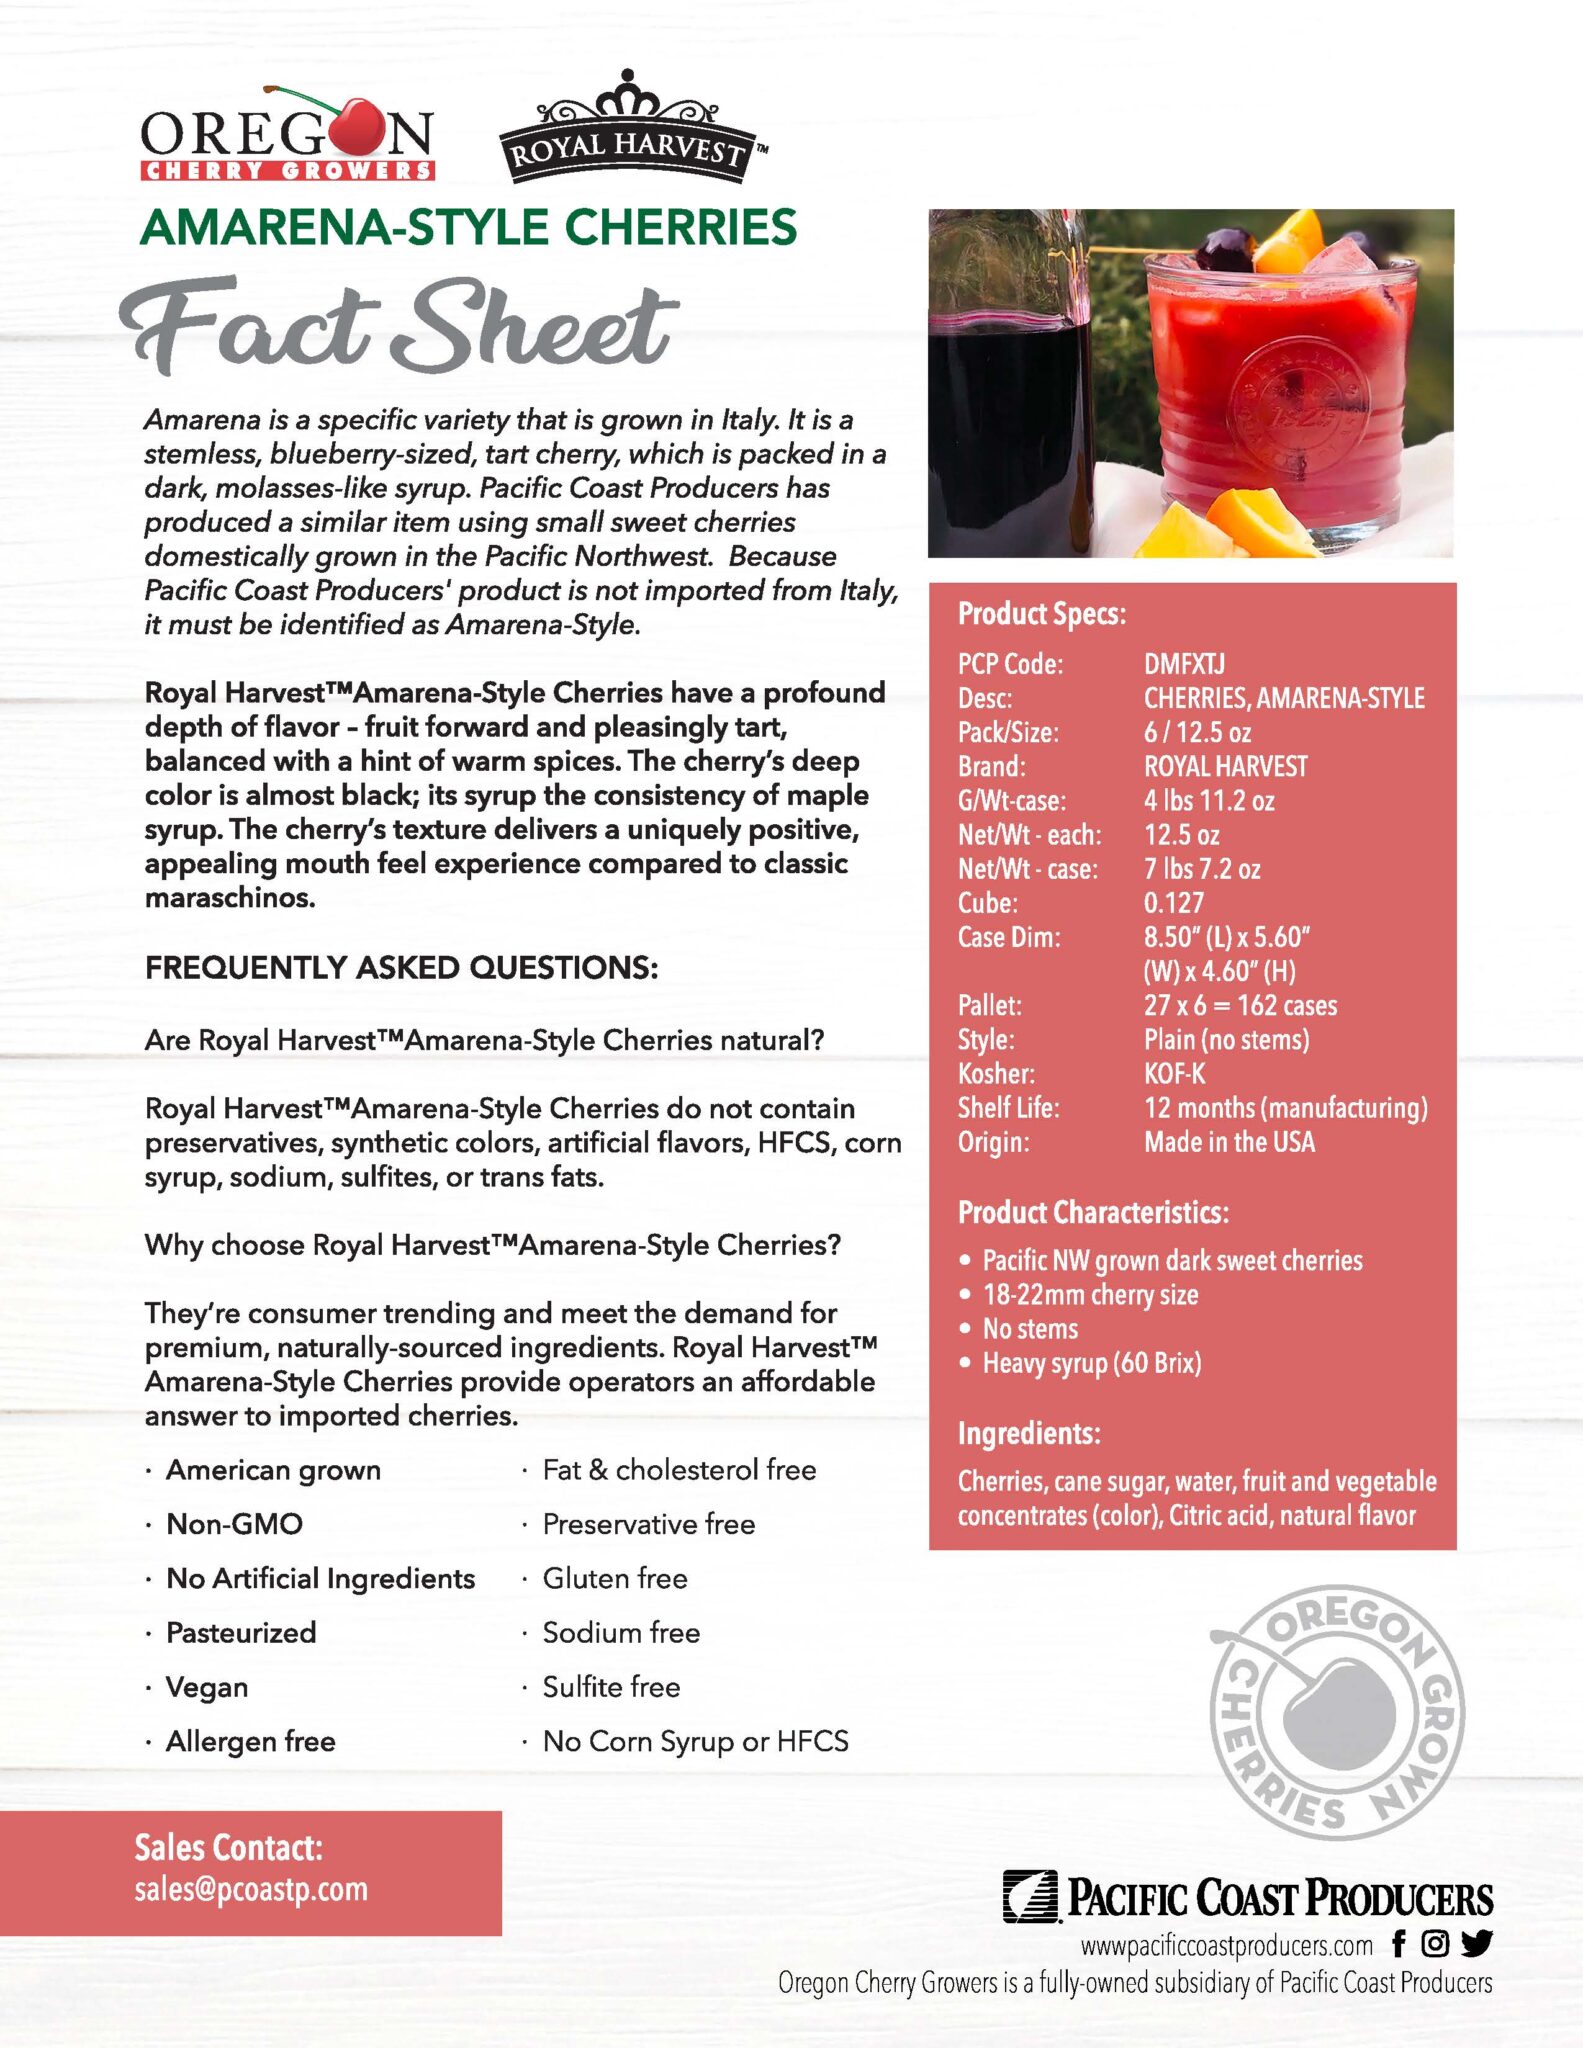 Oxford fact sheet with sales information on apricot-style cherries.